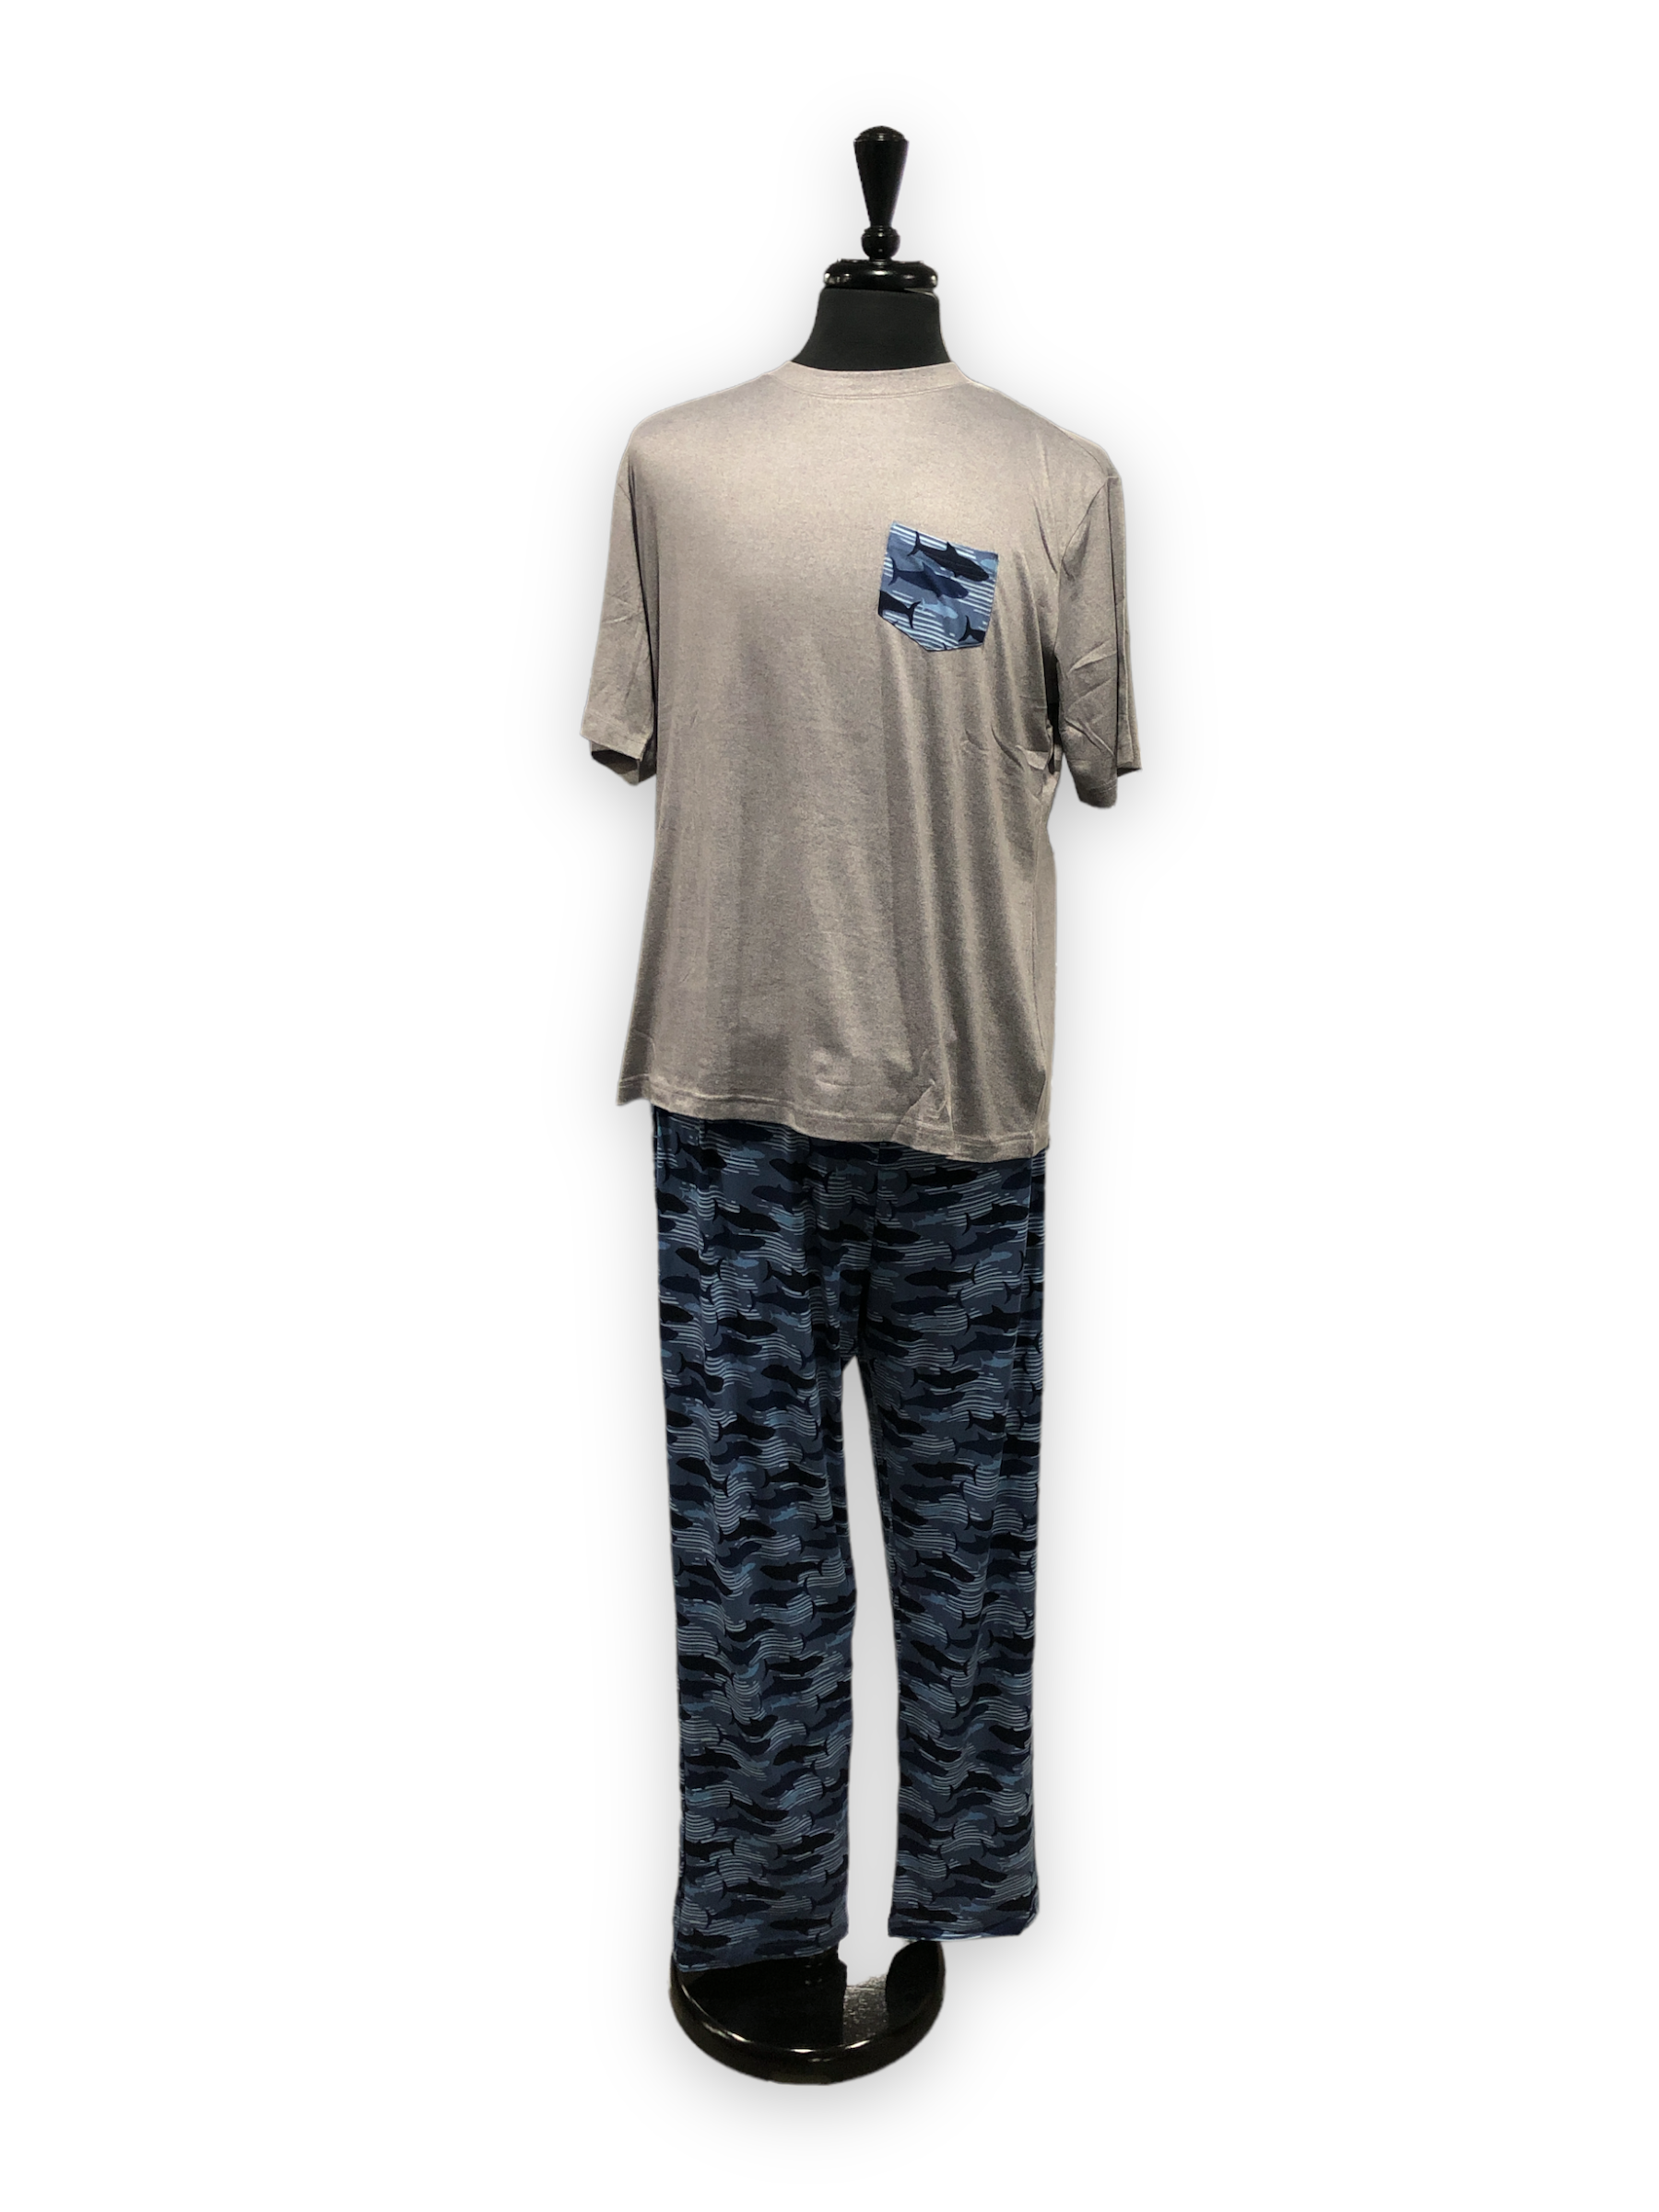 Men's Two Piece Peached Jersey Knit Pajama Set with T-Shirt